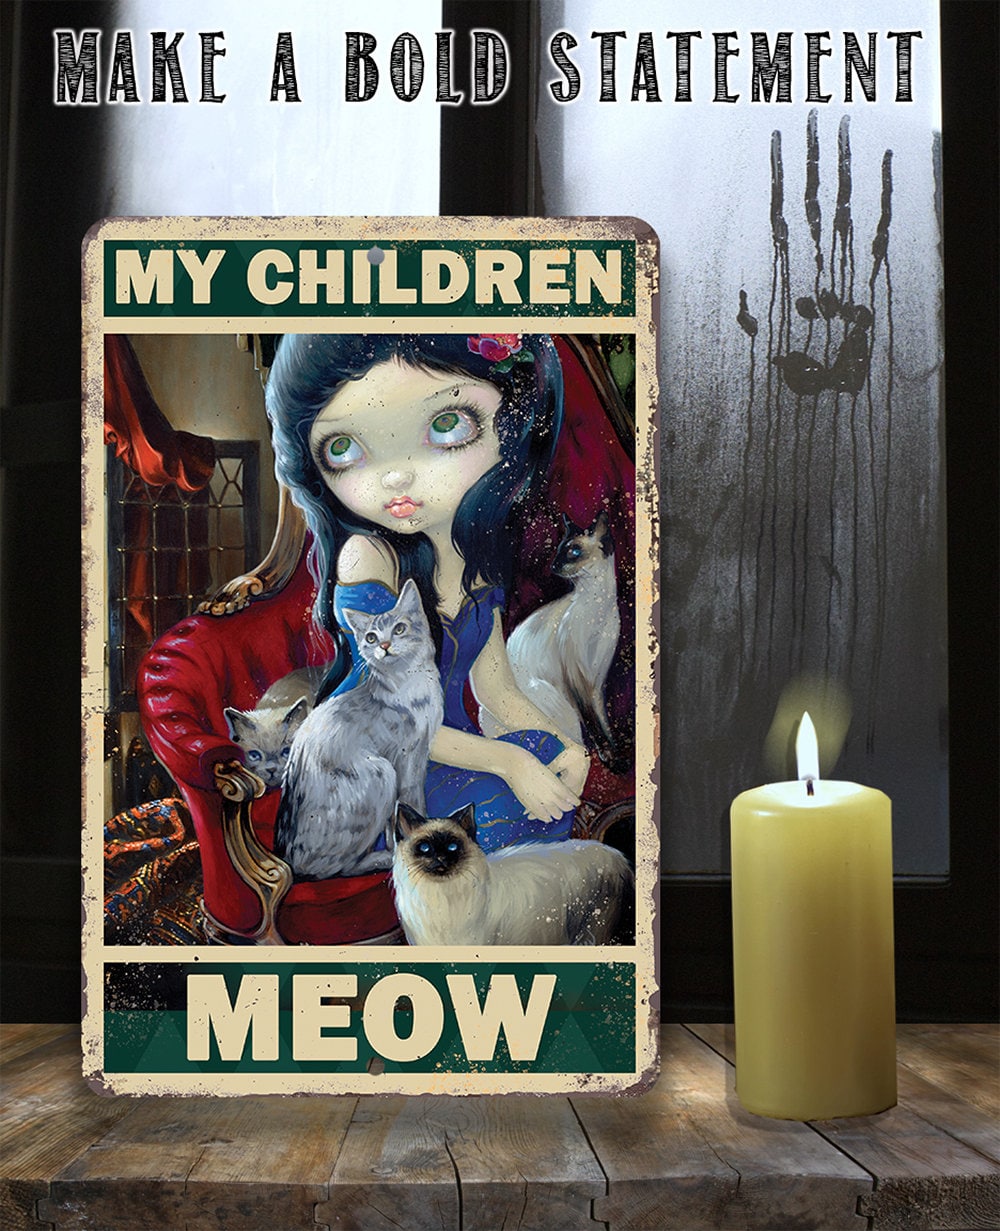 My Children Meow - 8" x 12" or 12" x 18" Aluminum Tin Awesome Gothic Metal Poster Lone Star Art 